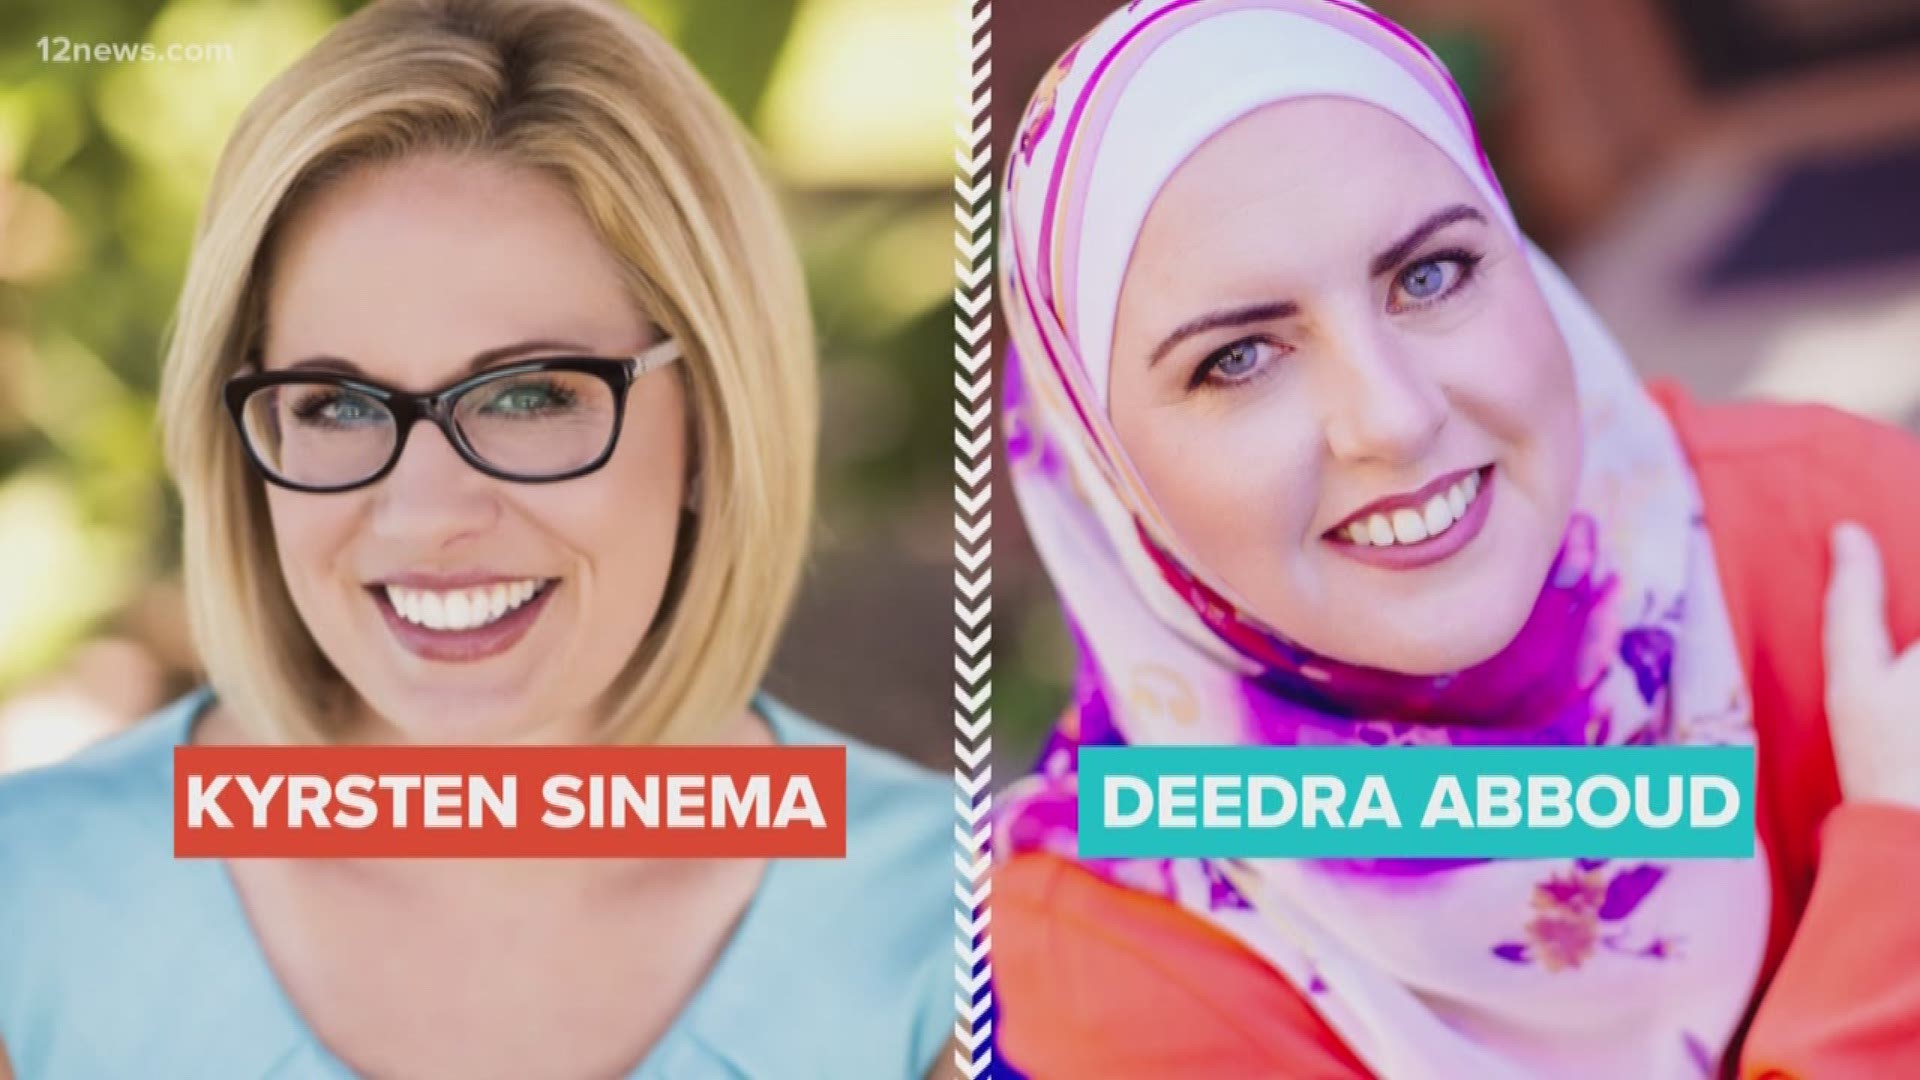 The race between Kyrsten Sinema and Deedra Abboud is seen as a David and Goliath match-up.
